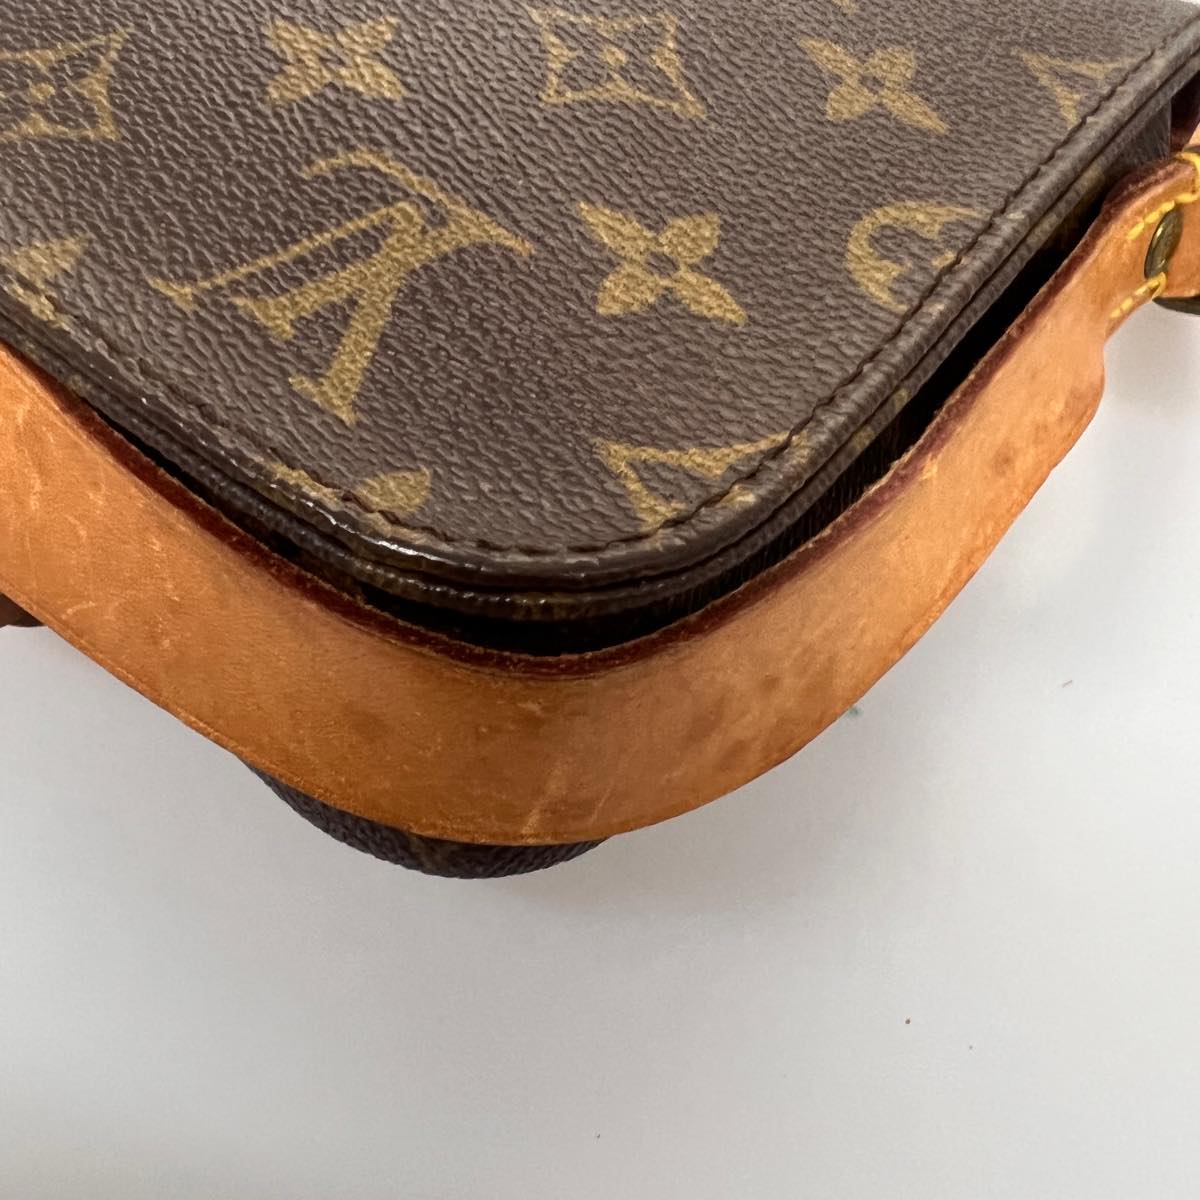 🔥 SPECIAL 2023 Louis Vuitton CARRYALL PM NEW IN BOX INVOICE SHIP FROM  FRANCE